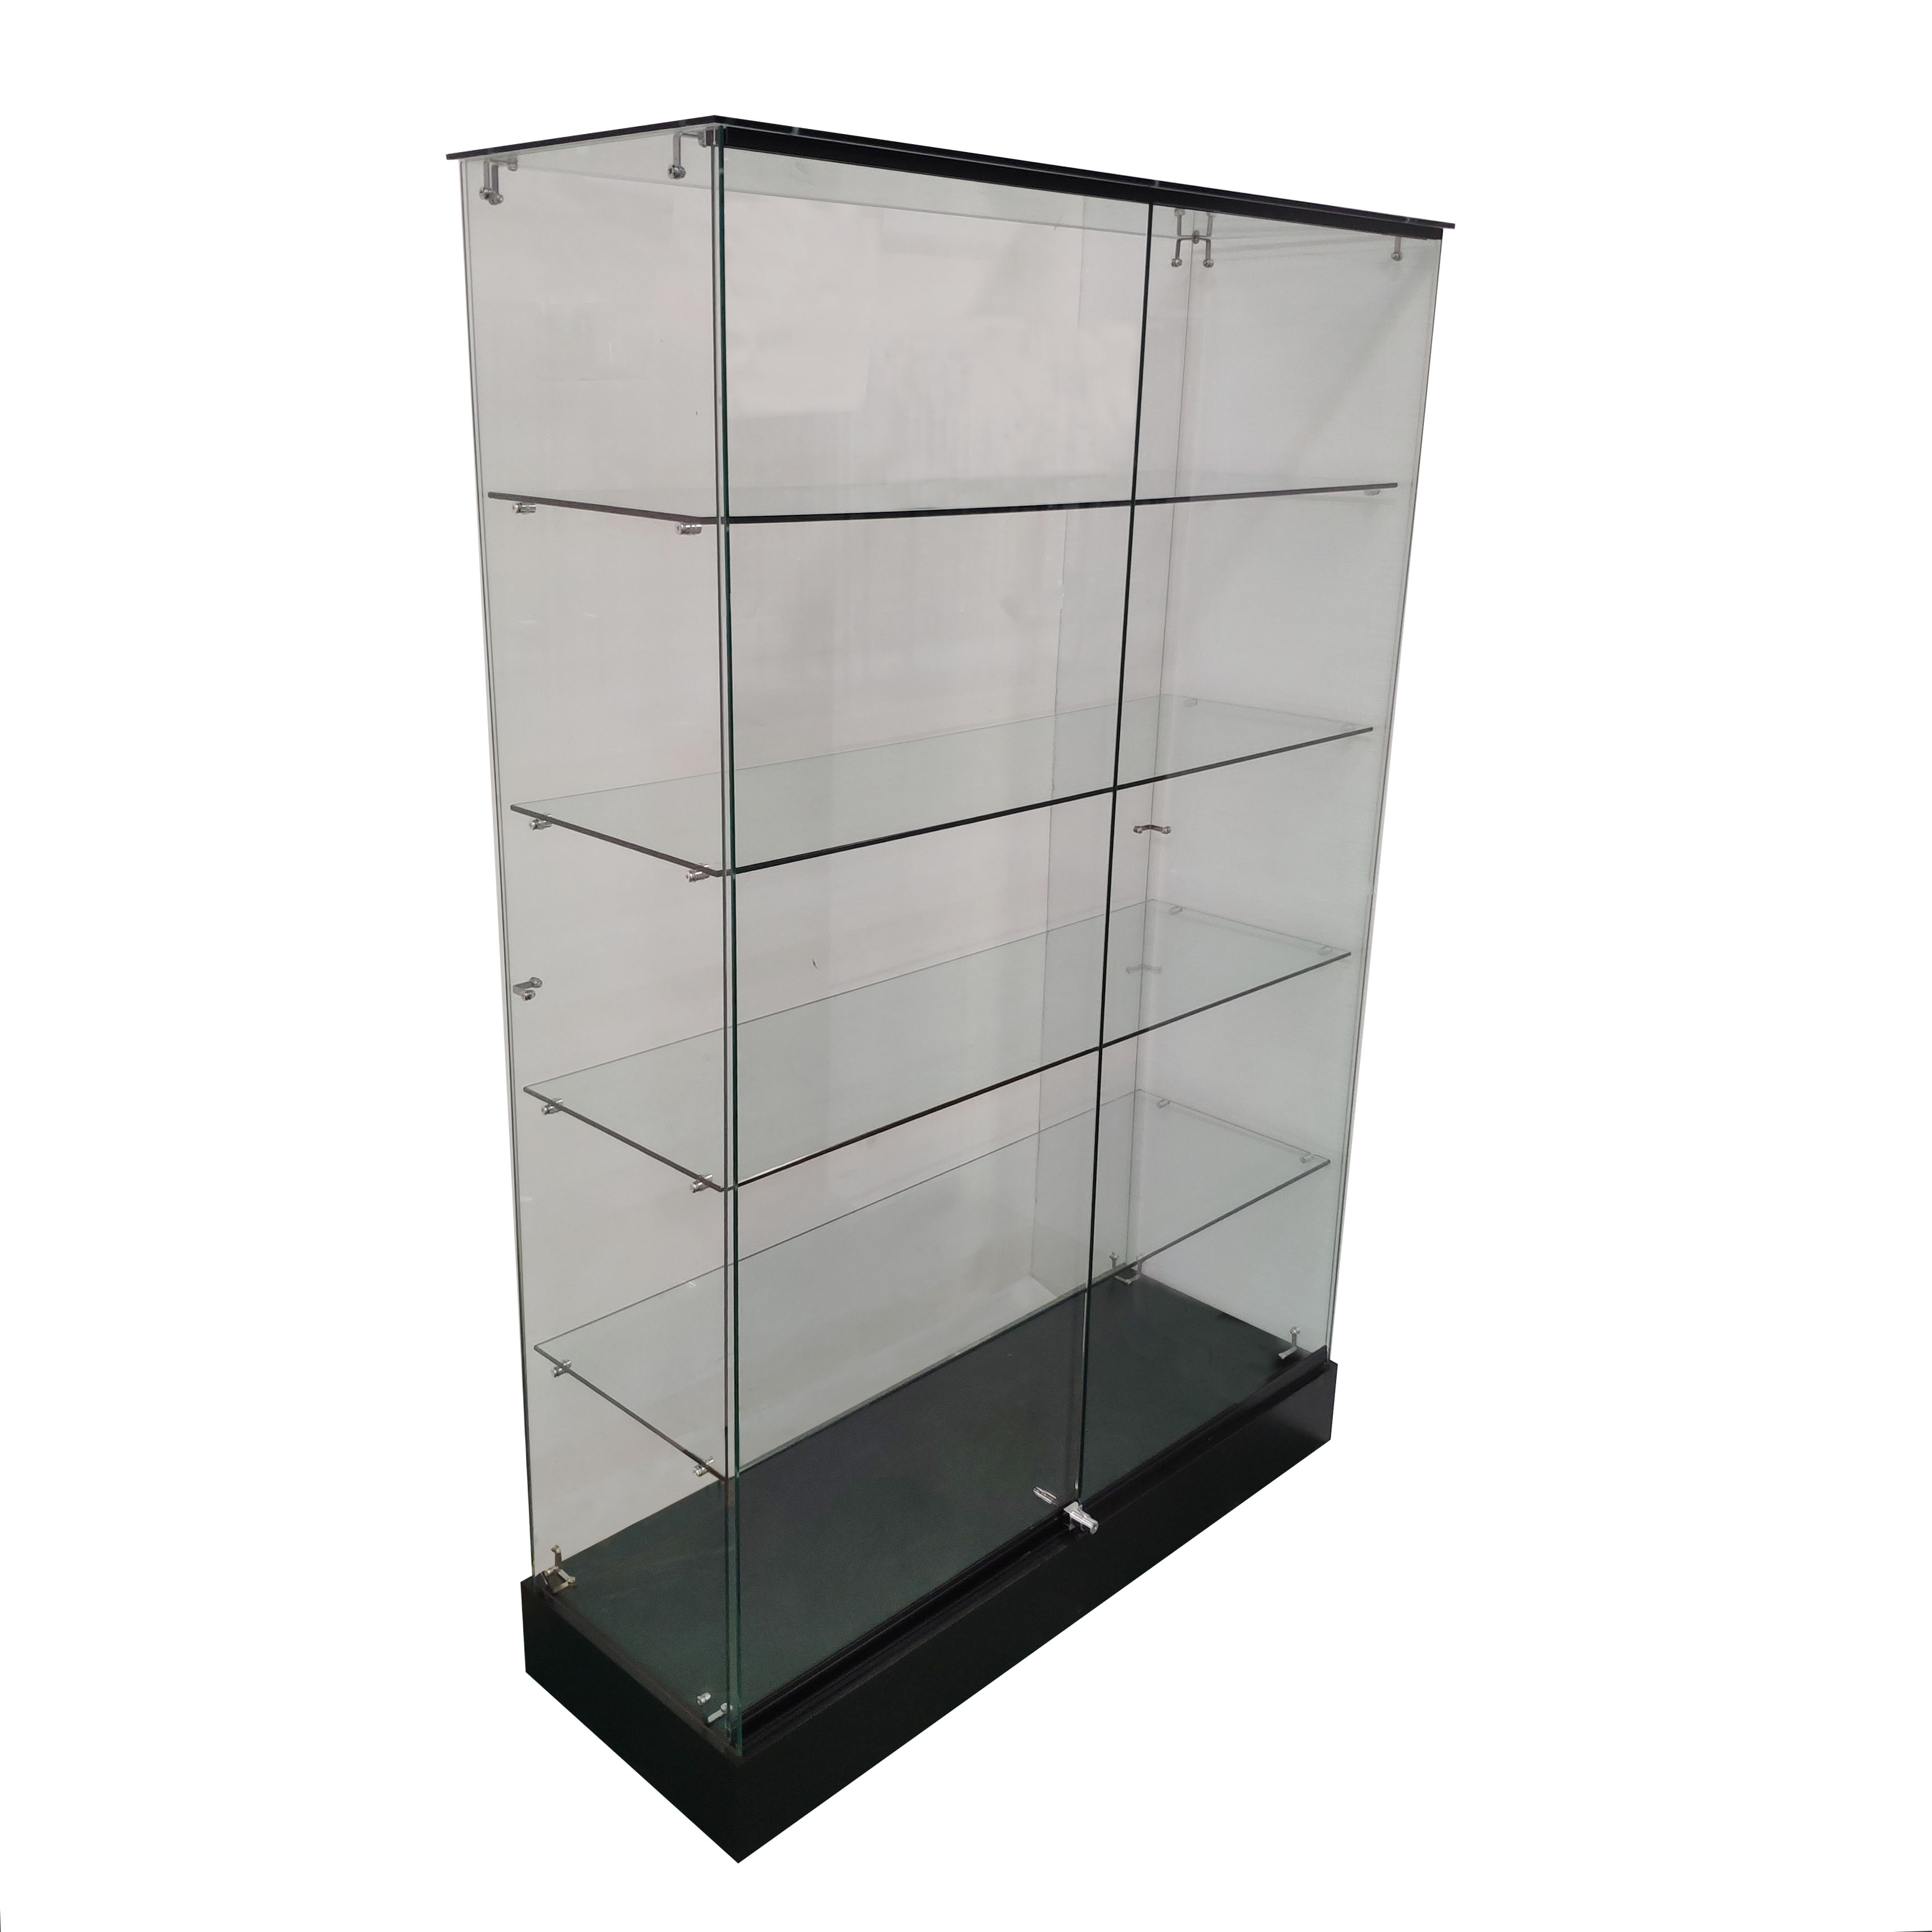 https://www.oyeshowcases.com/custom-display-cases-for-collectibles-with-80mm-base-including-adjustable-feet-oye-product/